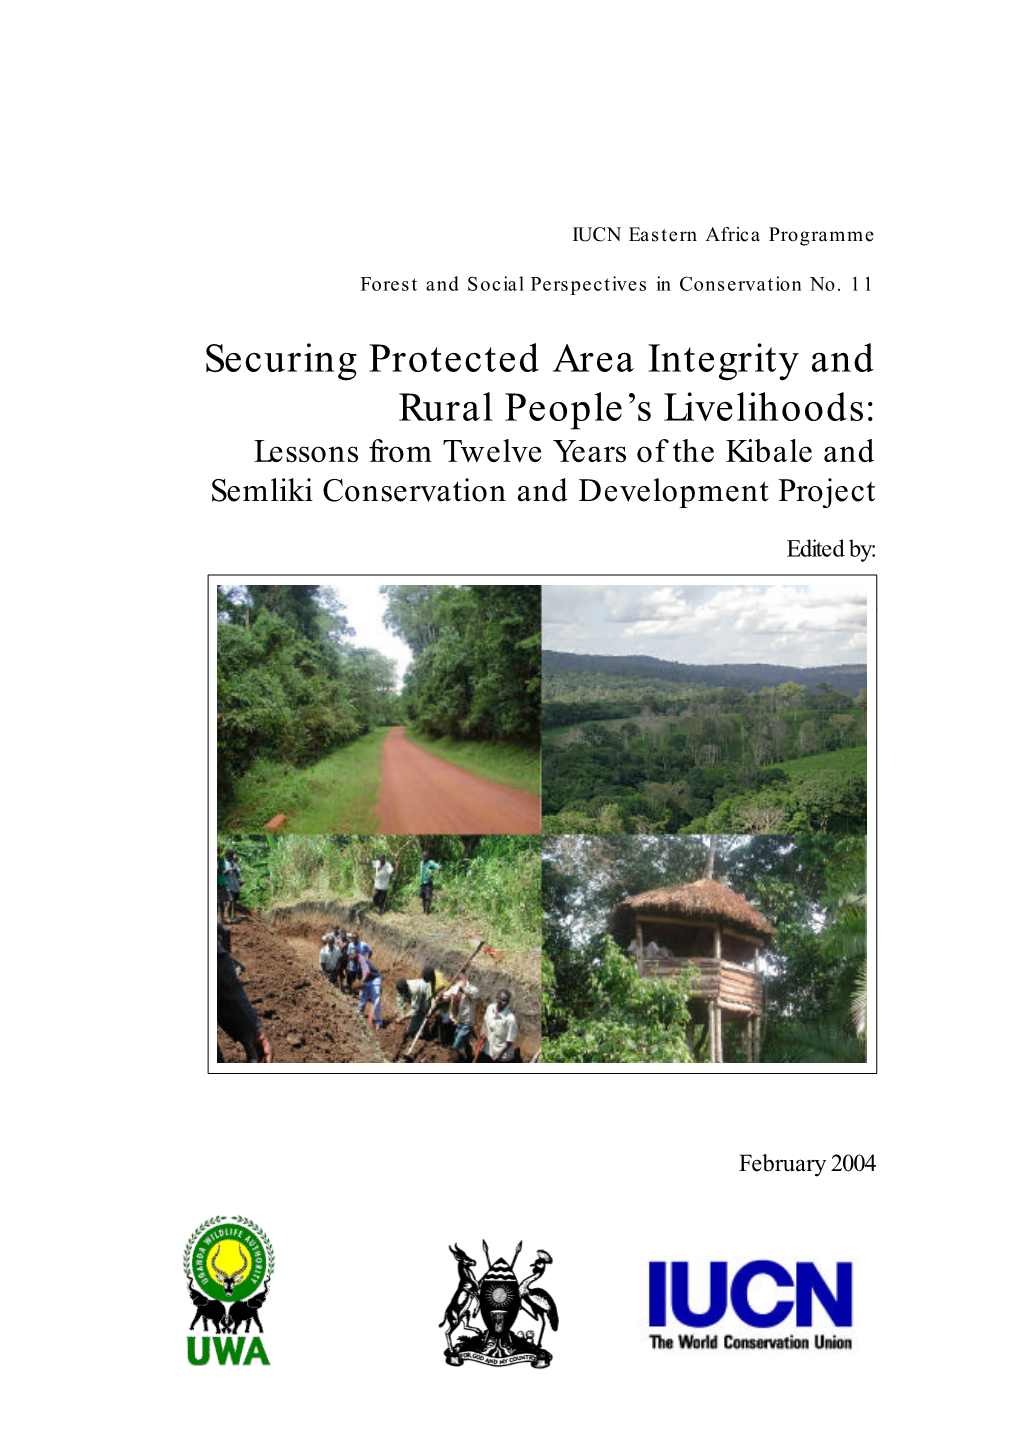 Securing Protected Area Integrity and Rural People's Livelihoods: Lessons for Twelve Years of the Kibale and Semliki Conservation and Development Project